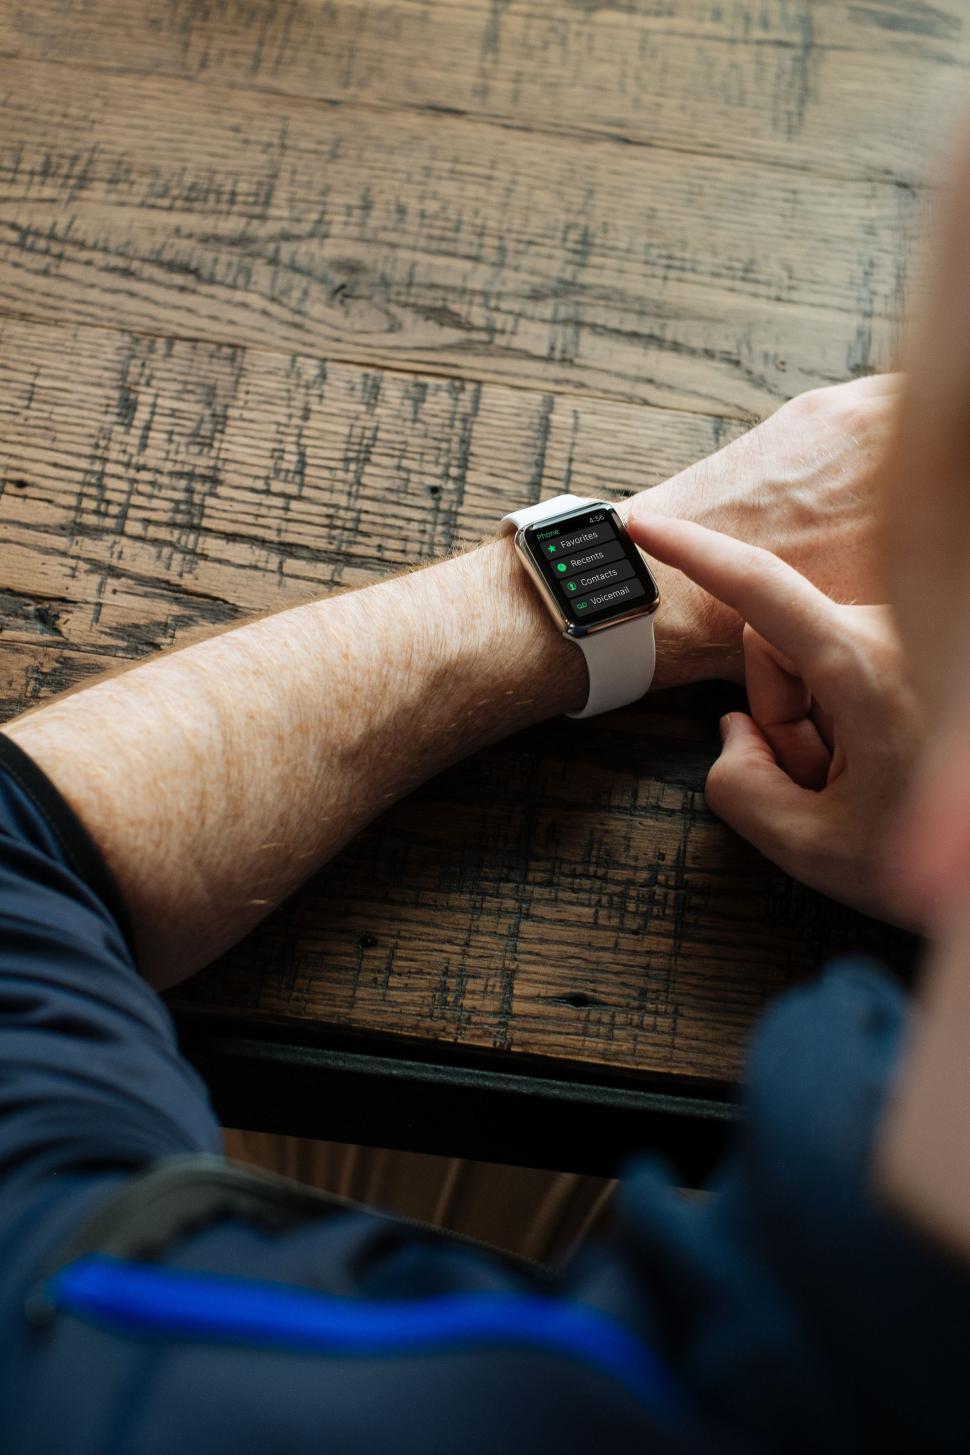 Free Image of Man Sitting at Table With Smart Watch 